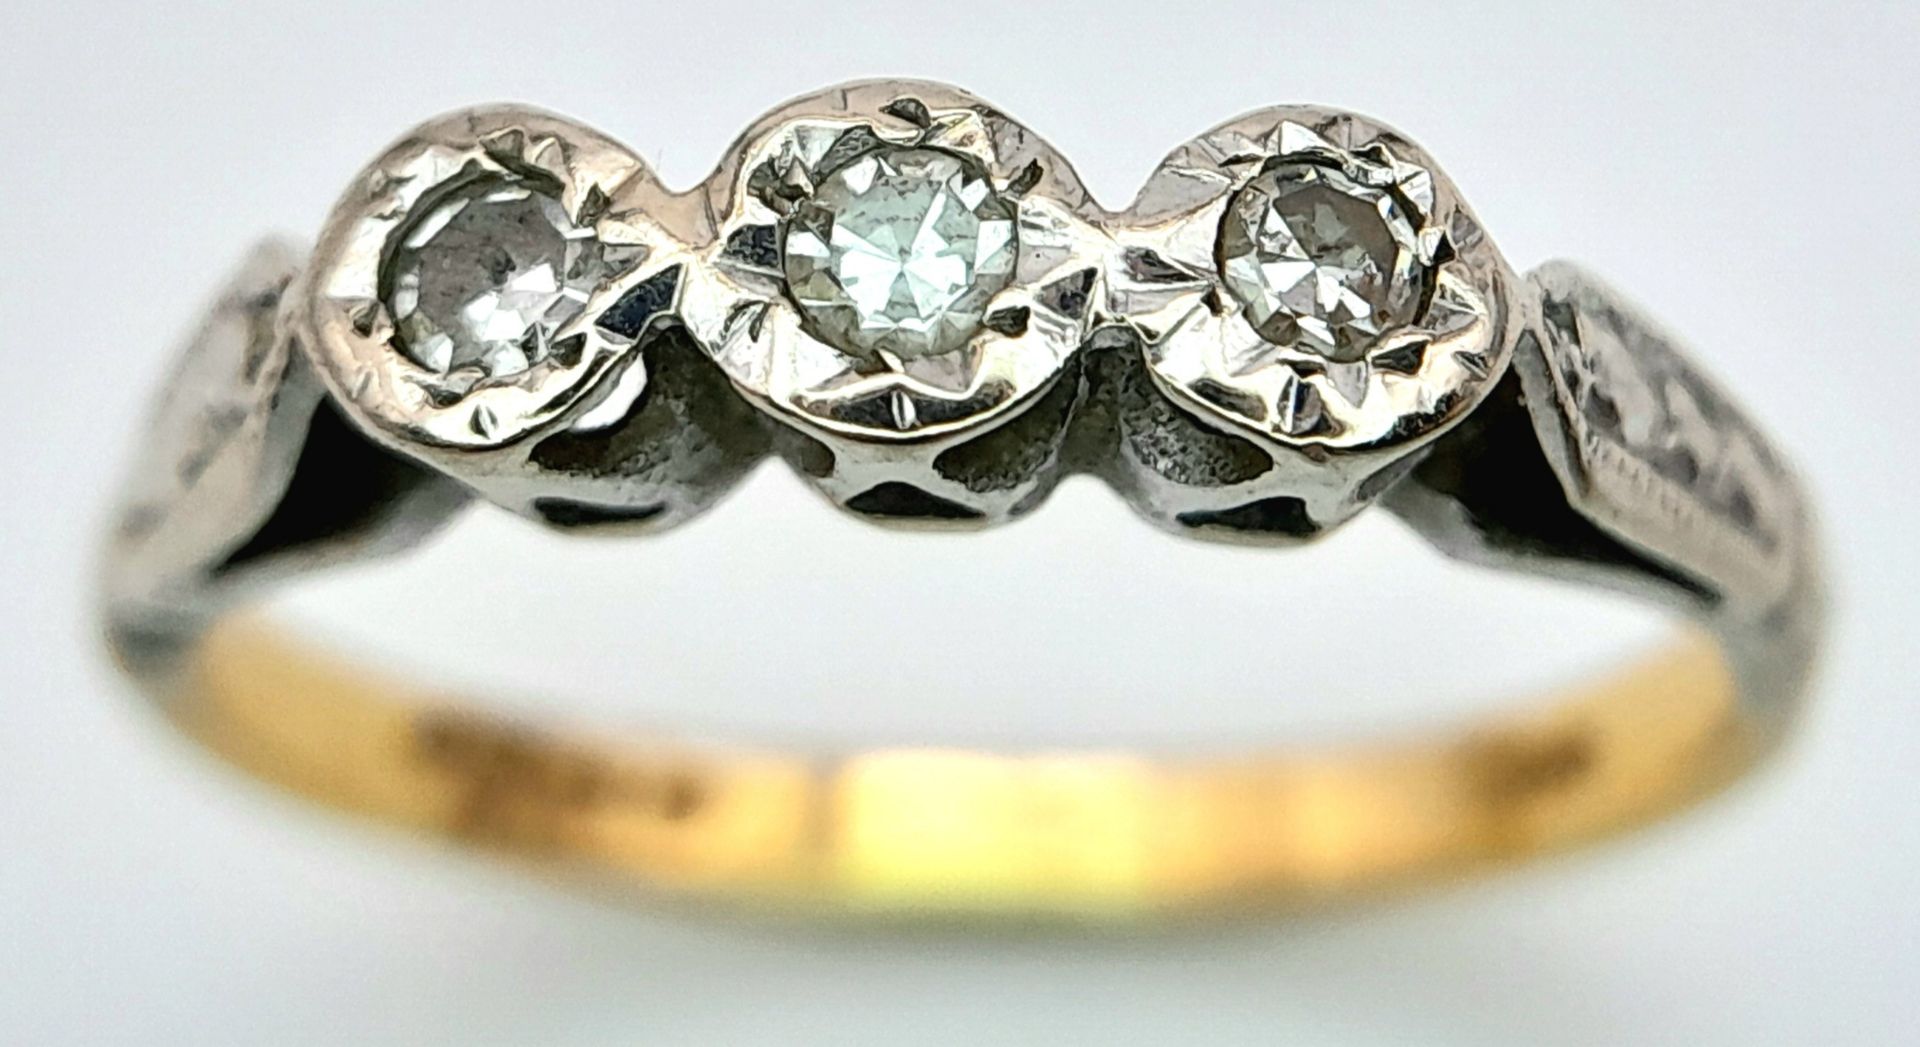 A VINTAGE 18K YELLOW GOLD DIAMOND RING. 1.8G. SIZE J. - Image 2 of 5